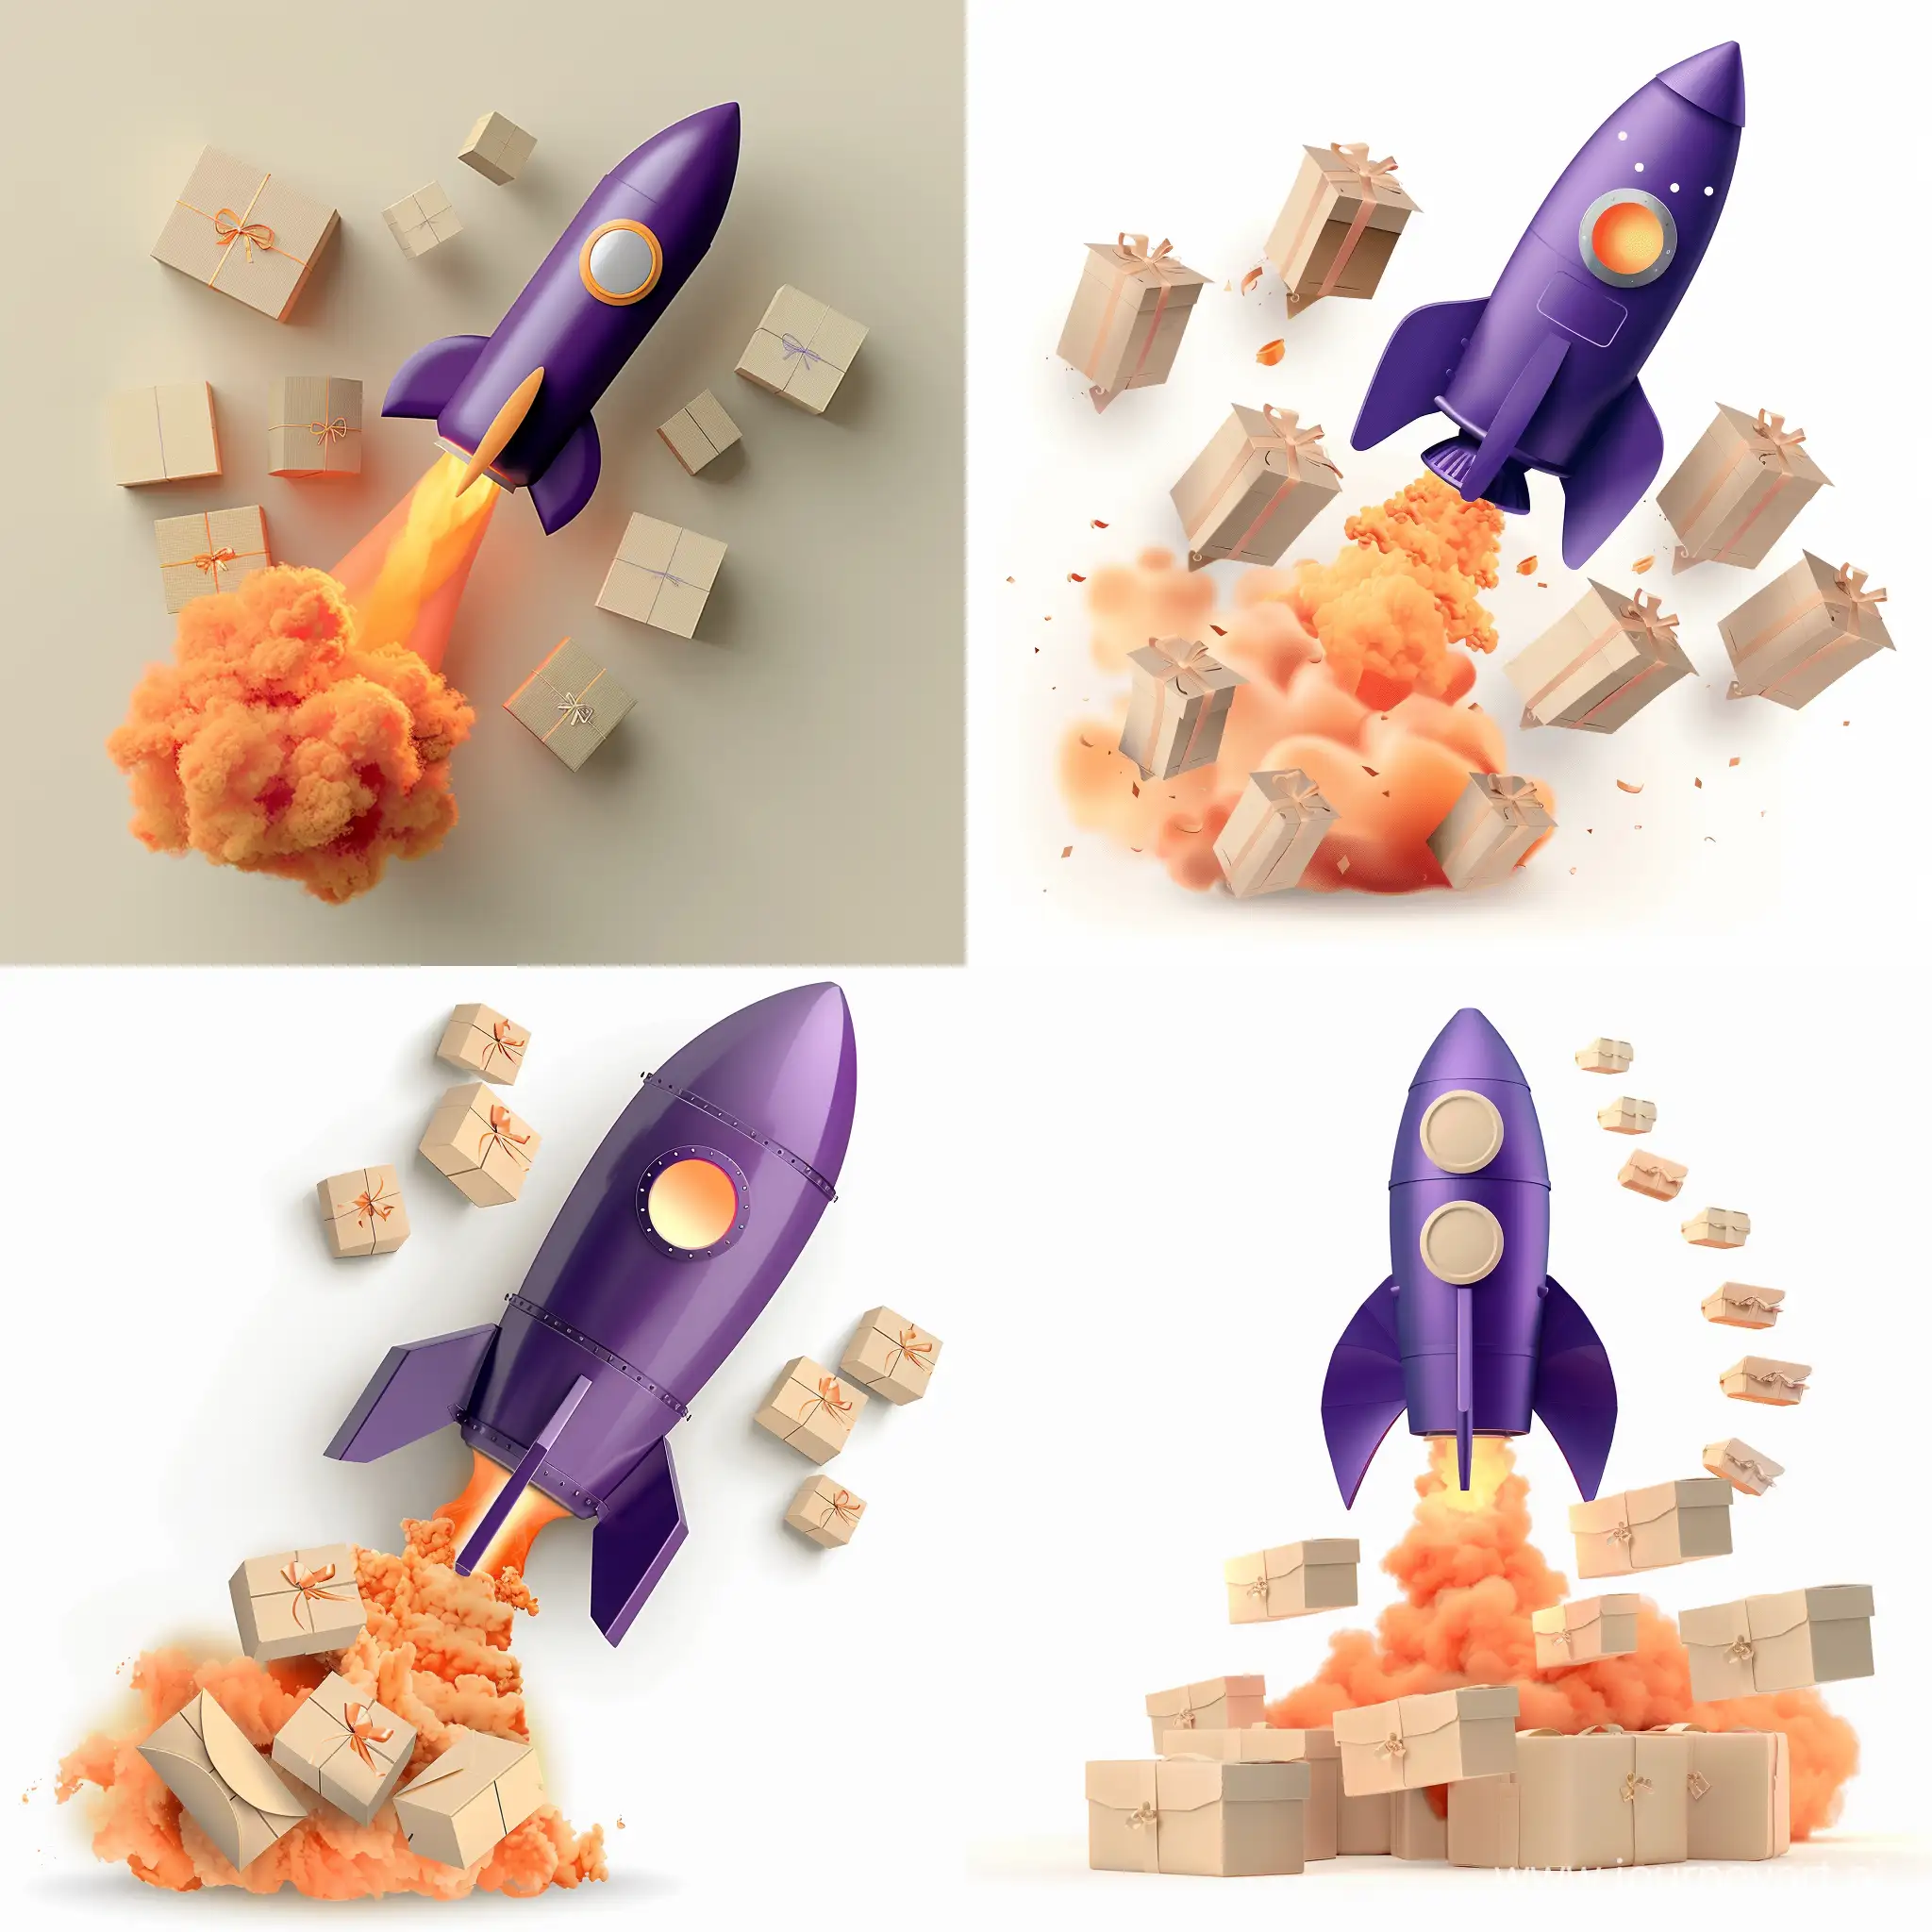 Purple-Rocket-with-Orange-Smoke-and-Cardboard-Packages